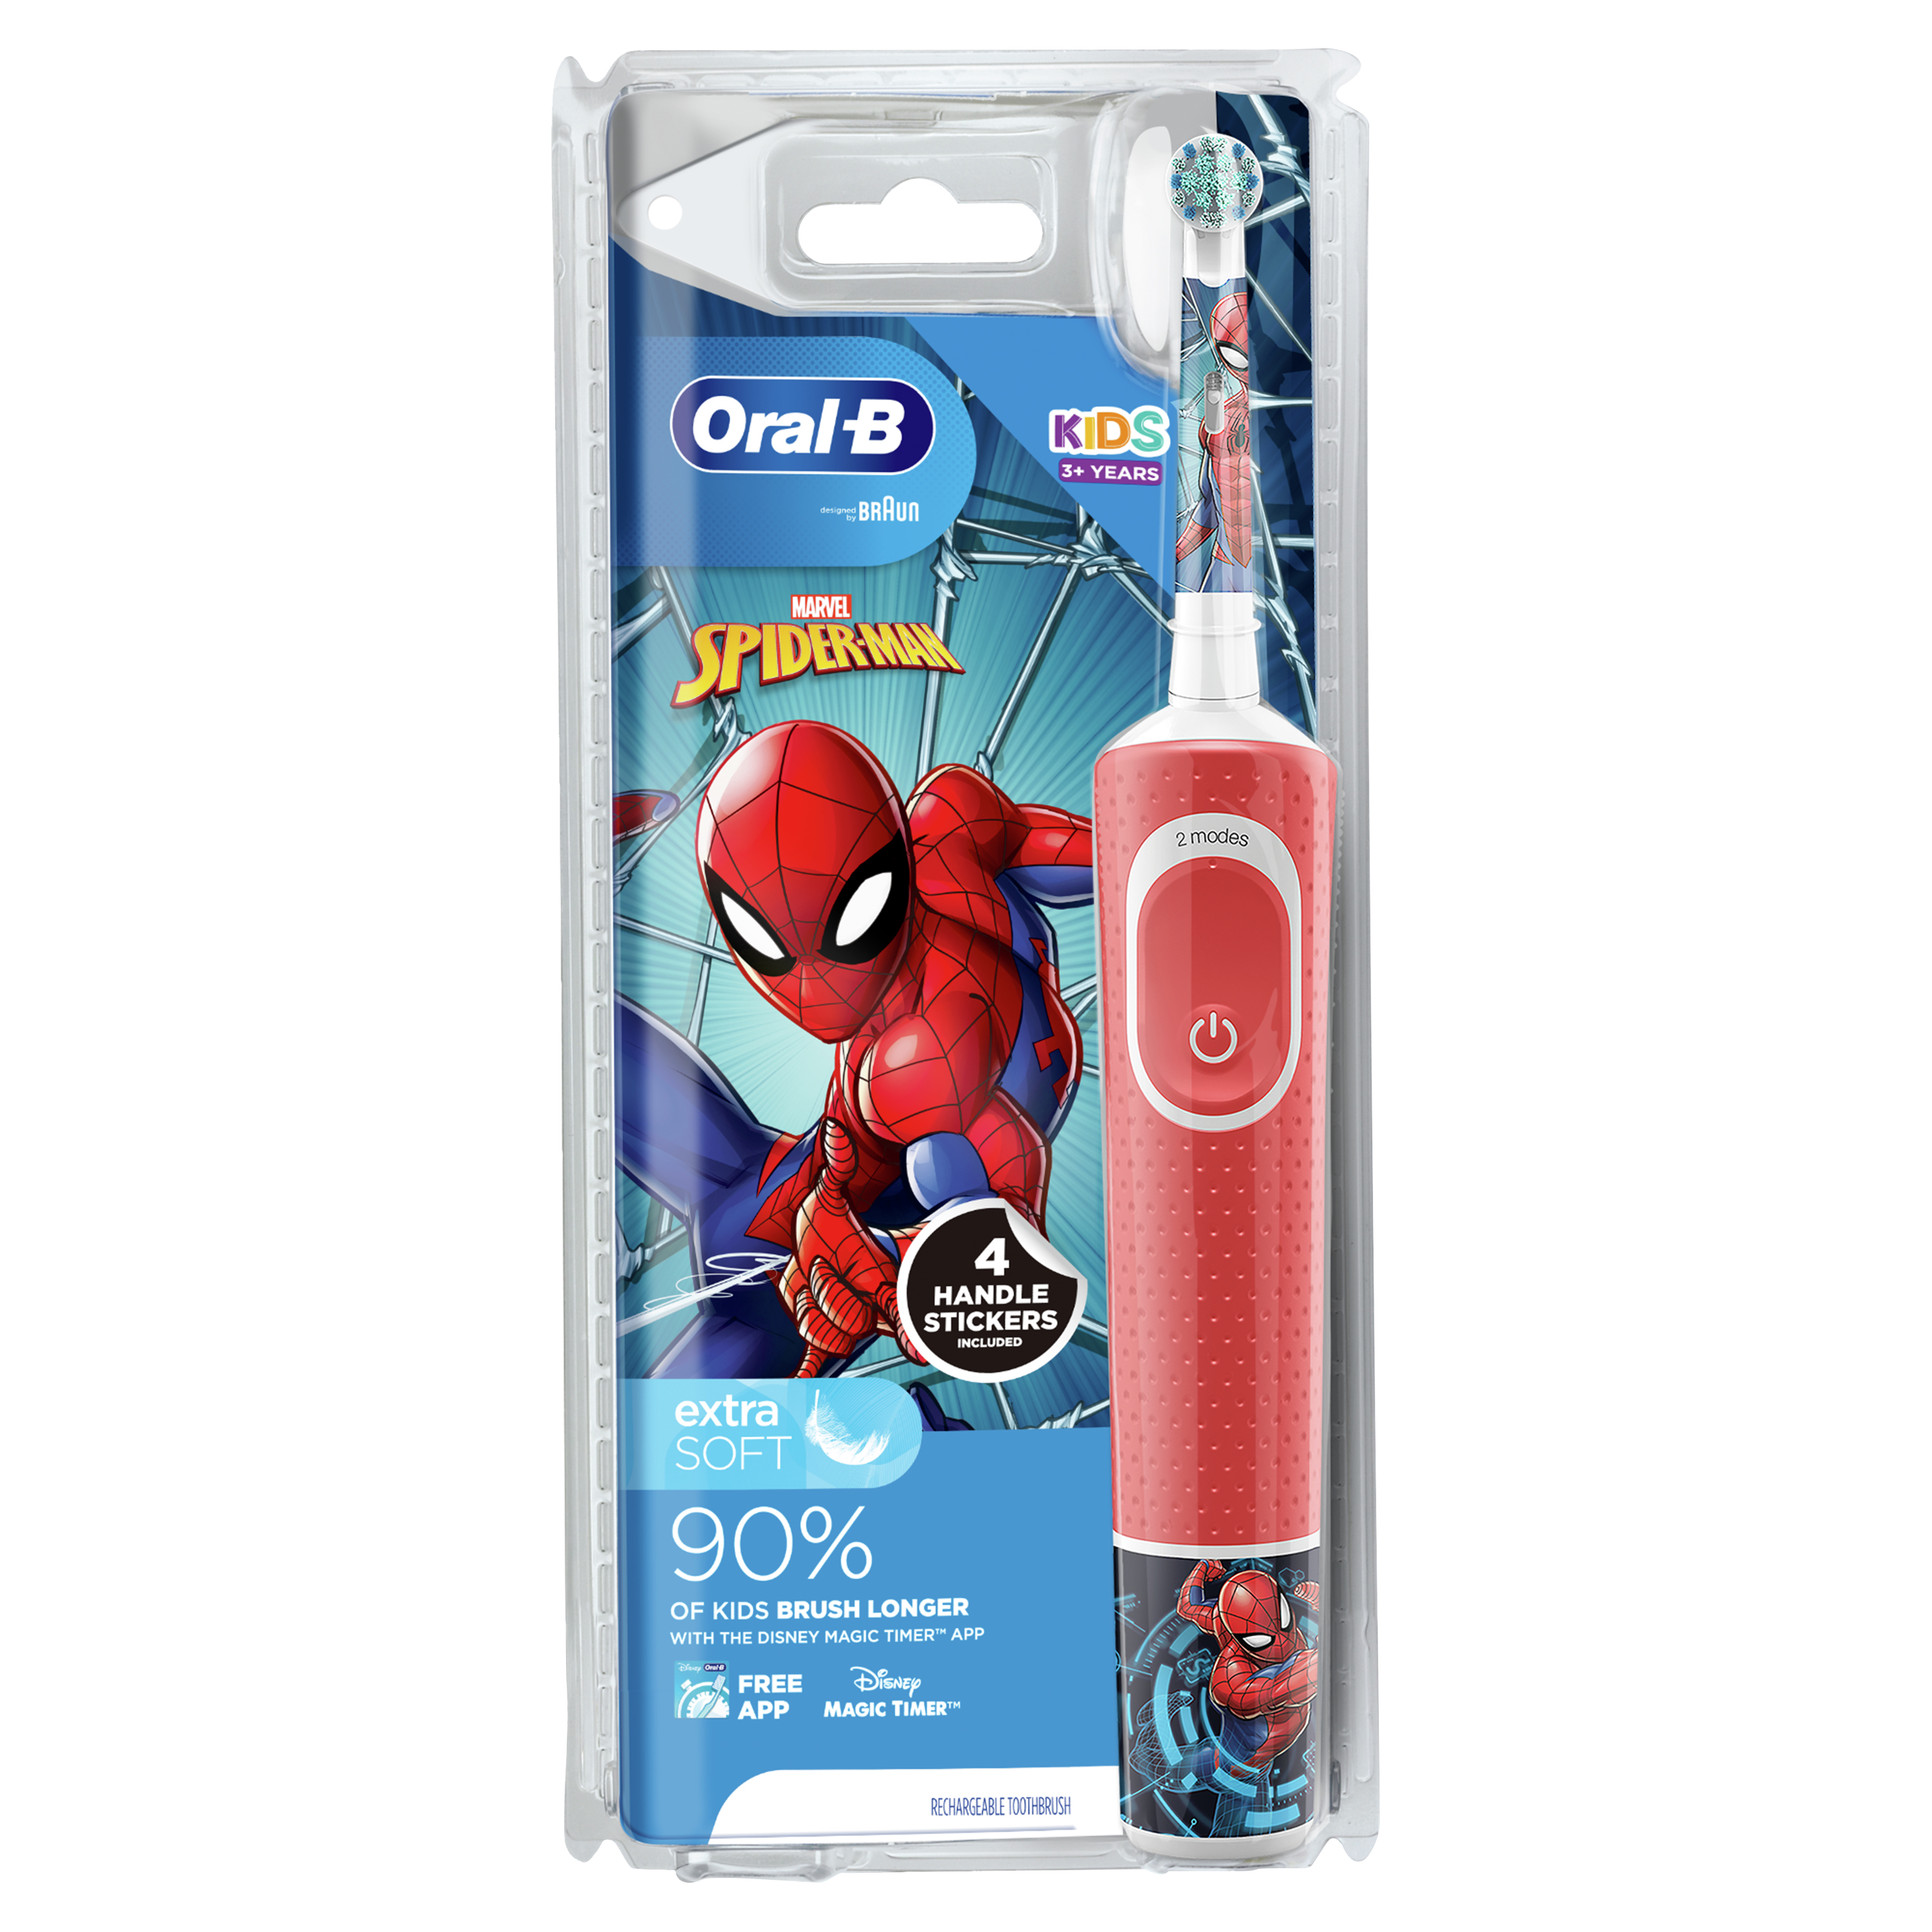 Compatible with several Oral-B toothbrushes